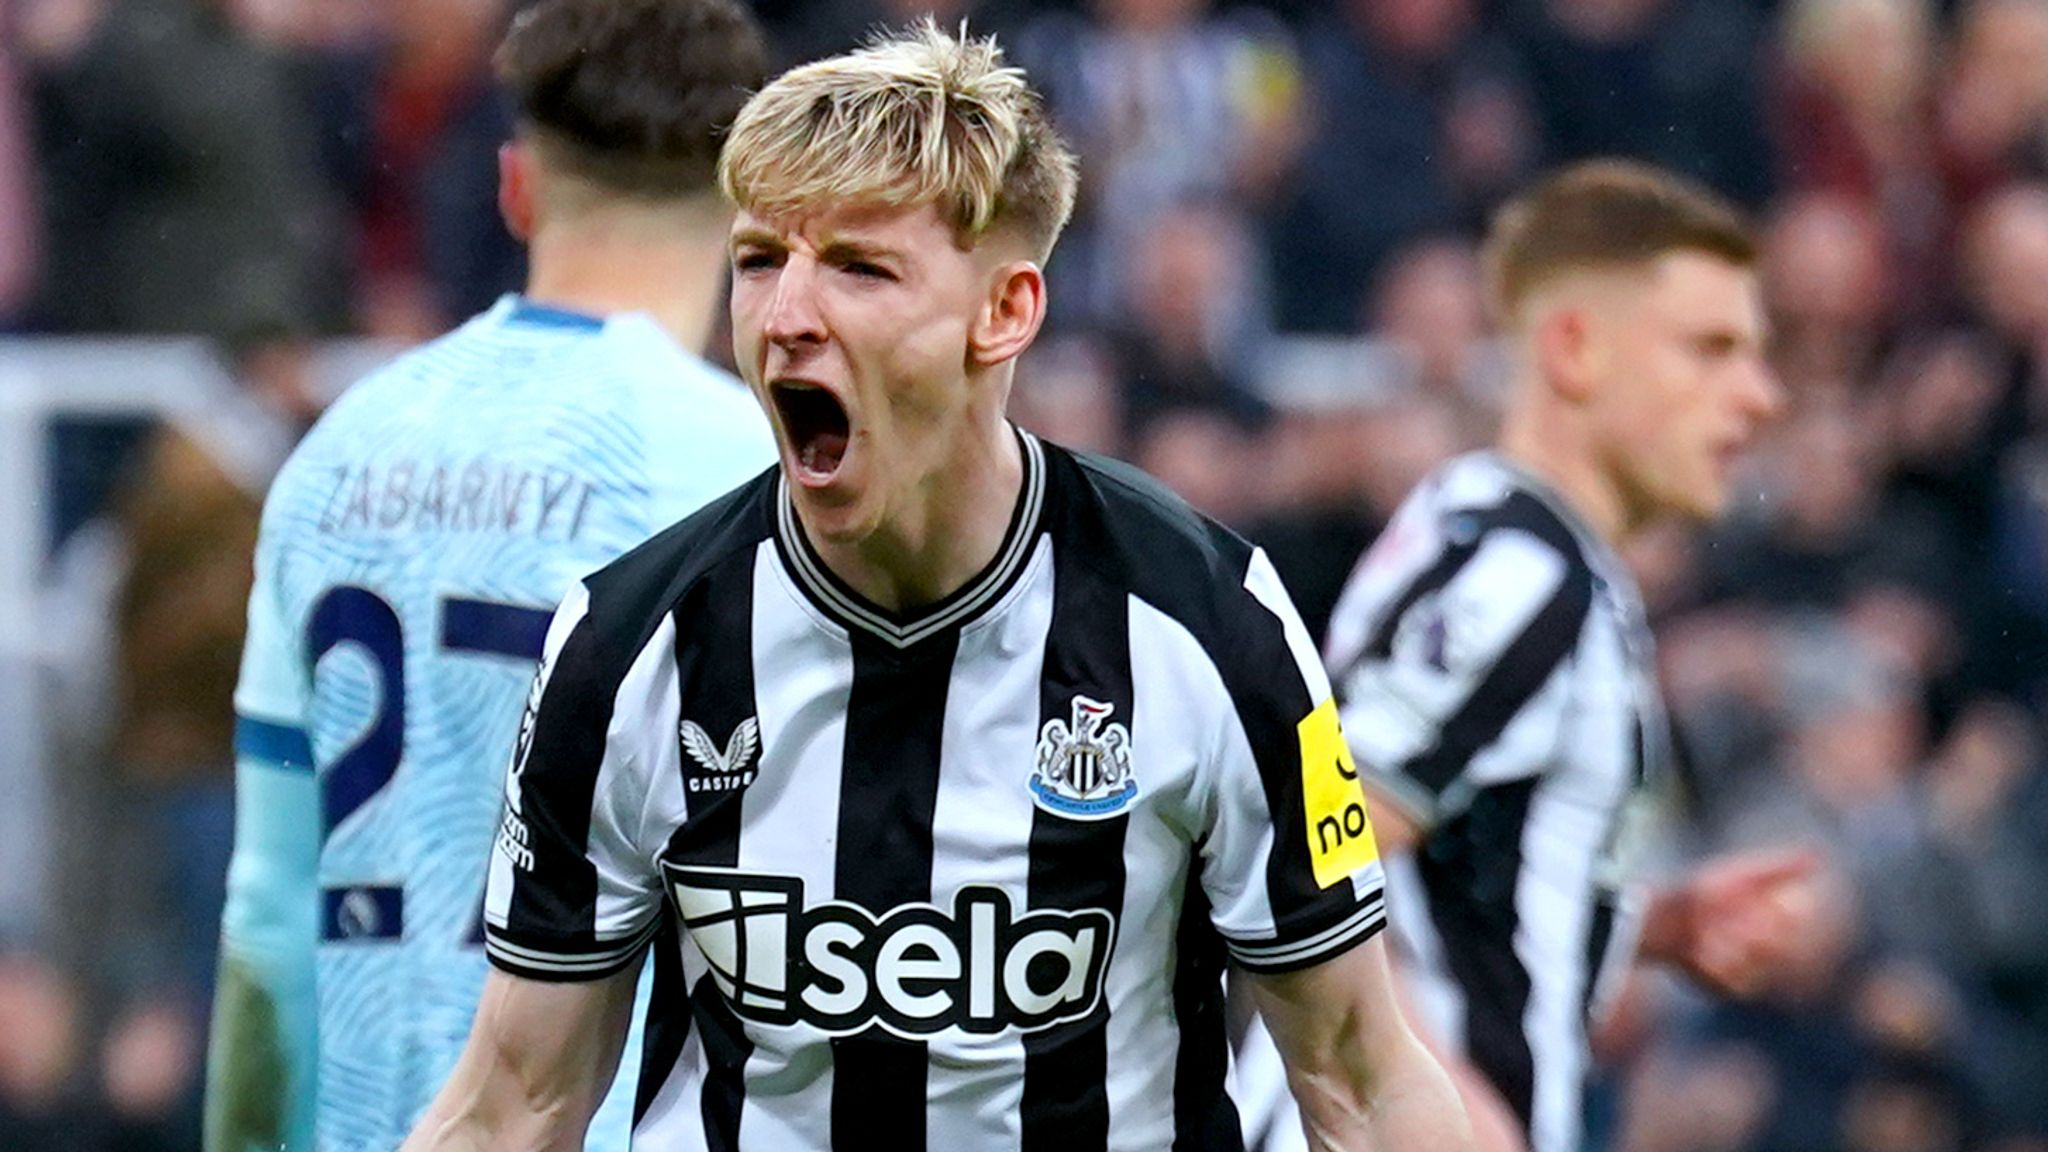 Newcastle 2 - 2 B'mouth - Match Report & Highlights